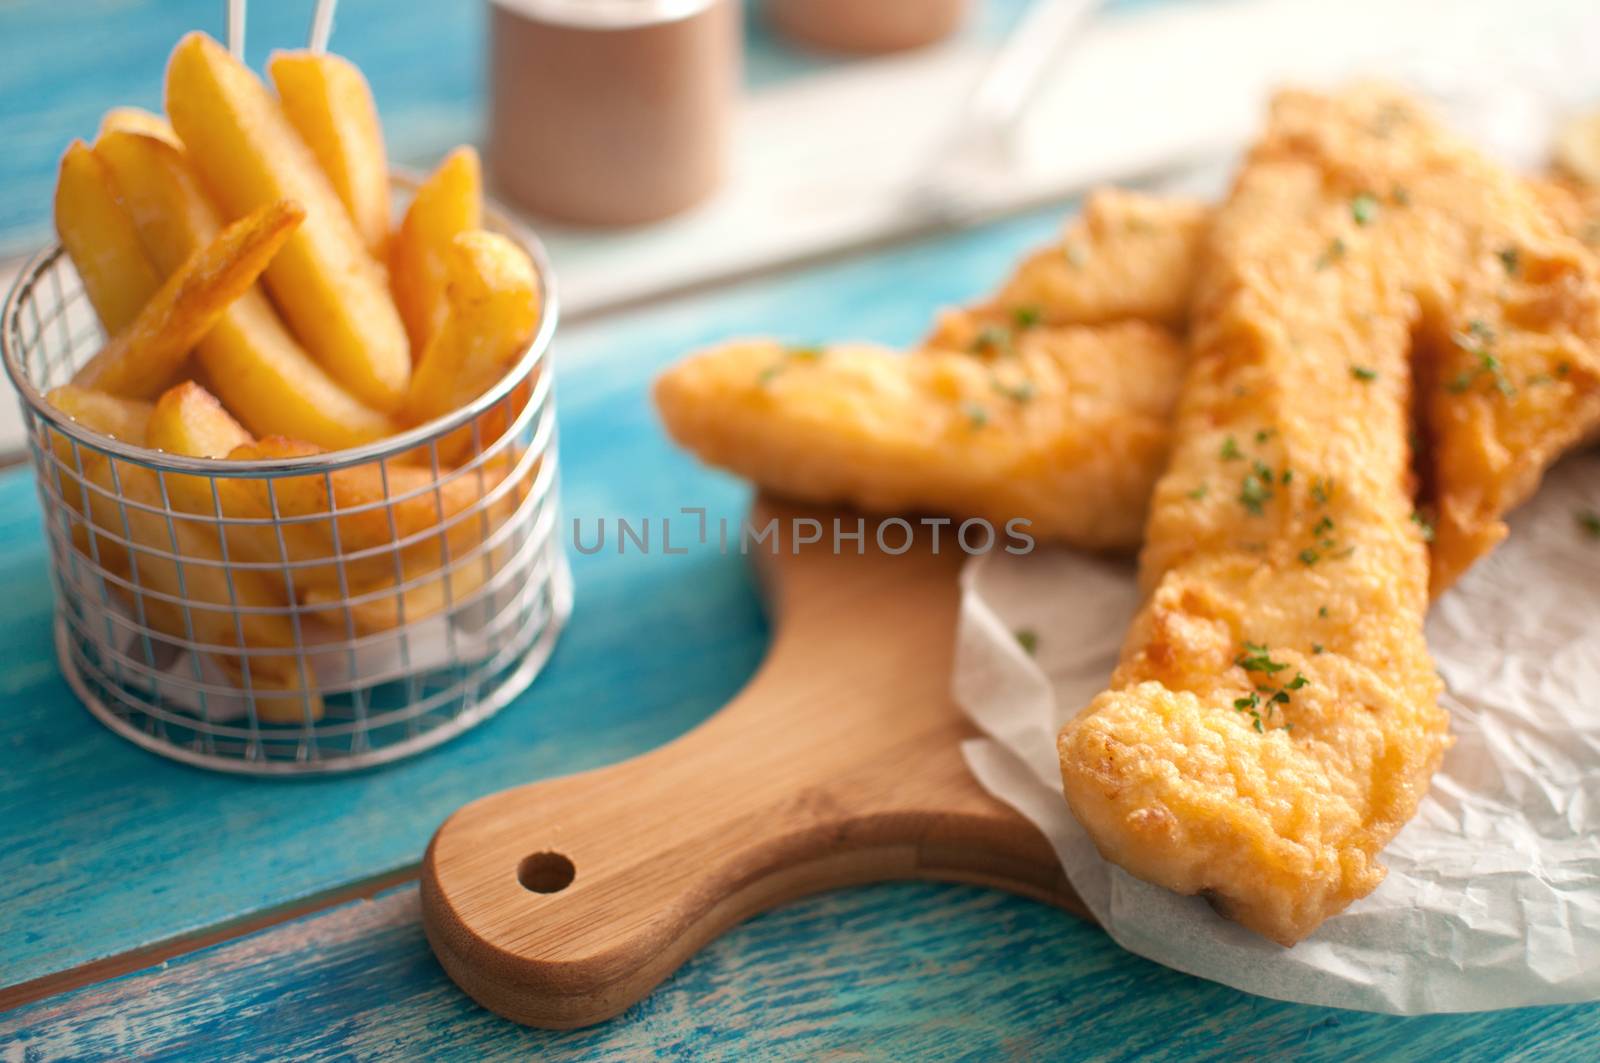 Two pieces of cod fried in batter with chips in a basket